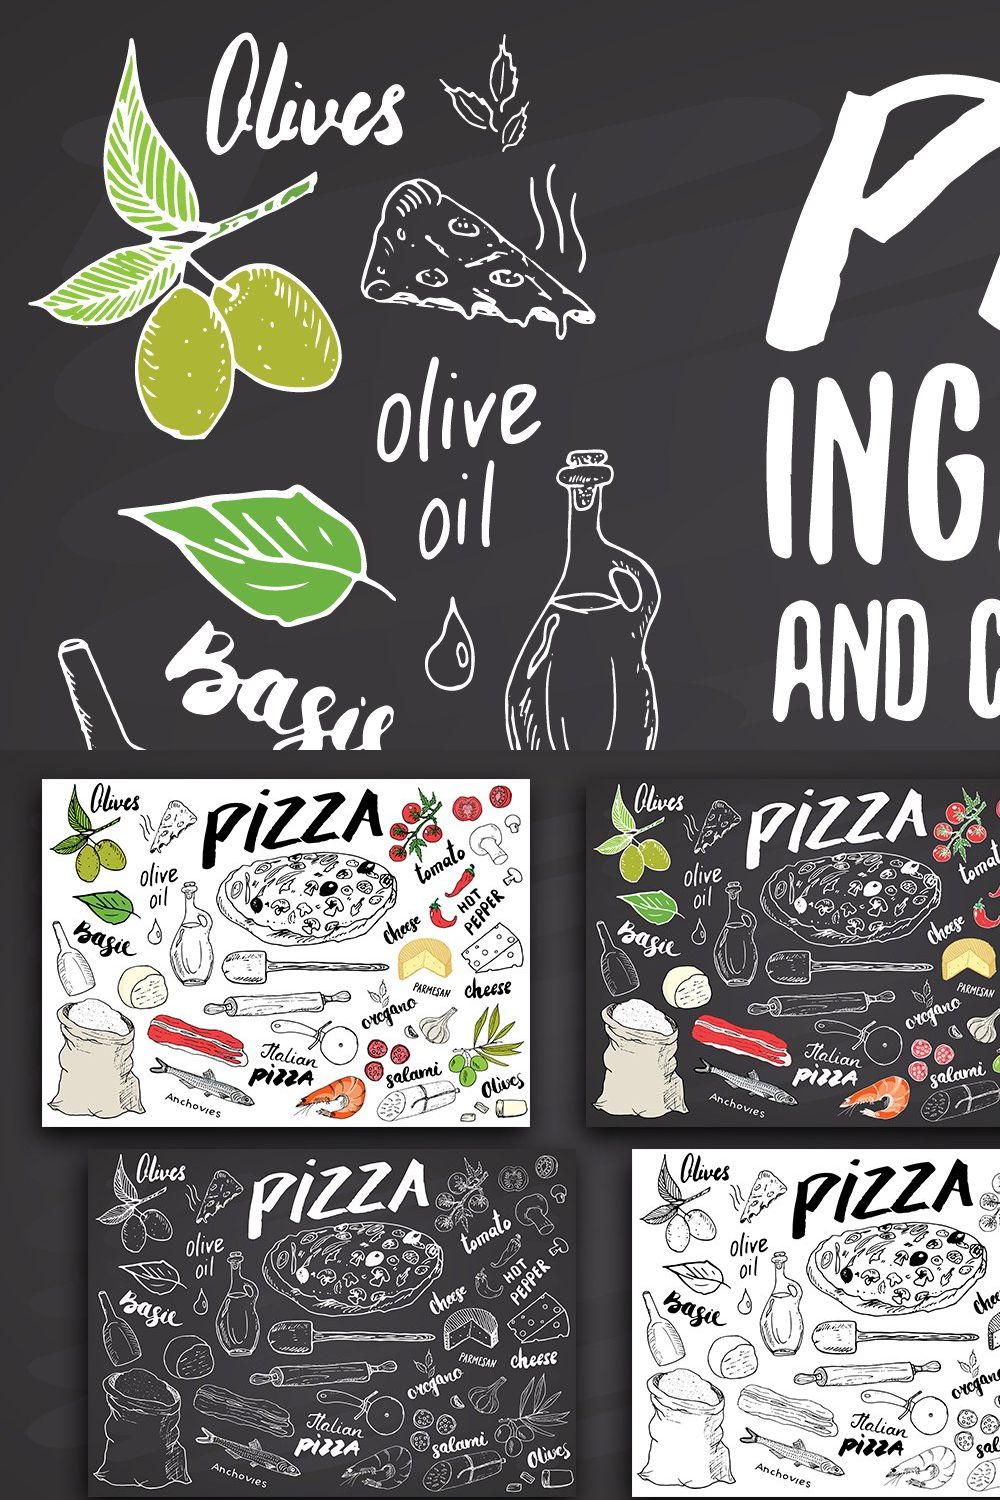 Pizza menu ingredients and patterns pinterest preview image.